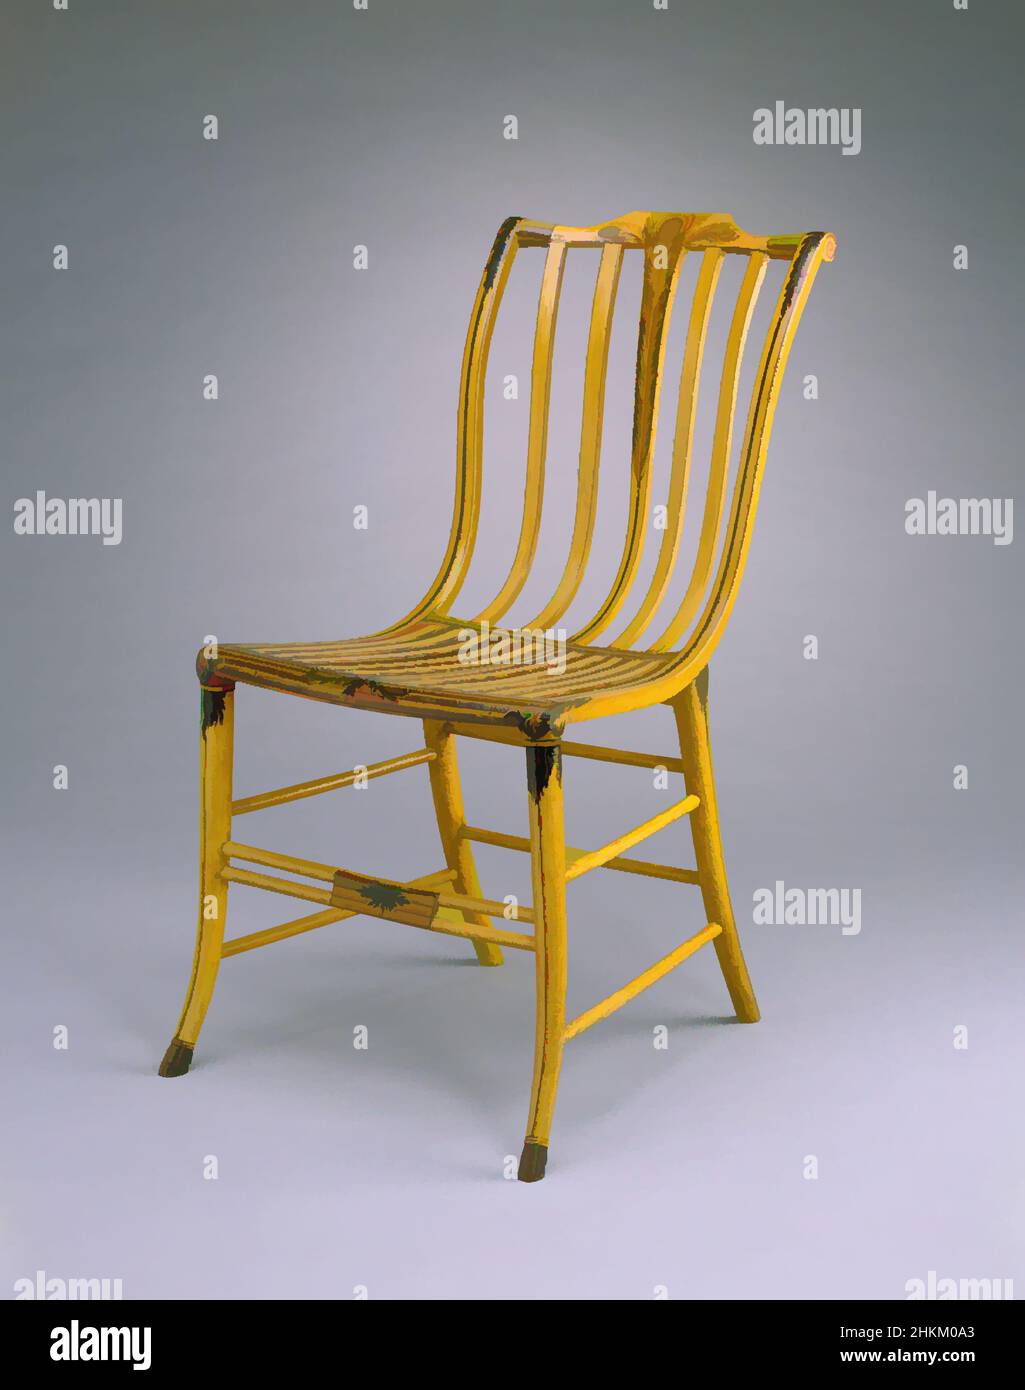 Art inspired by Elastic Chair, Samuel Gragg, American, 1772-1855, patented 1808, Painted and gilded oak and maple, Made in Boston, Massachusetts, United States, North and Central America, Furniture, 33 3/4 x 19 3/4 x 20 1/4 in. (85.7 x 50.2 x 51.4 cm, Classic works modernized by Artotop with a splash of modernity. Shapes, color and value, eye-catching visual impact on art. Emotions through freedom of artworks in a contemporary way. A timeless message pursuing a wildly creative new direction. Artists turning to the digital medium and creating the Artotop NFT Stock Photo